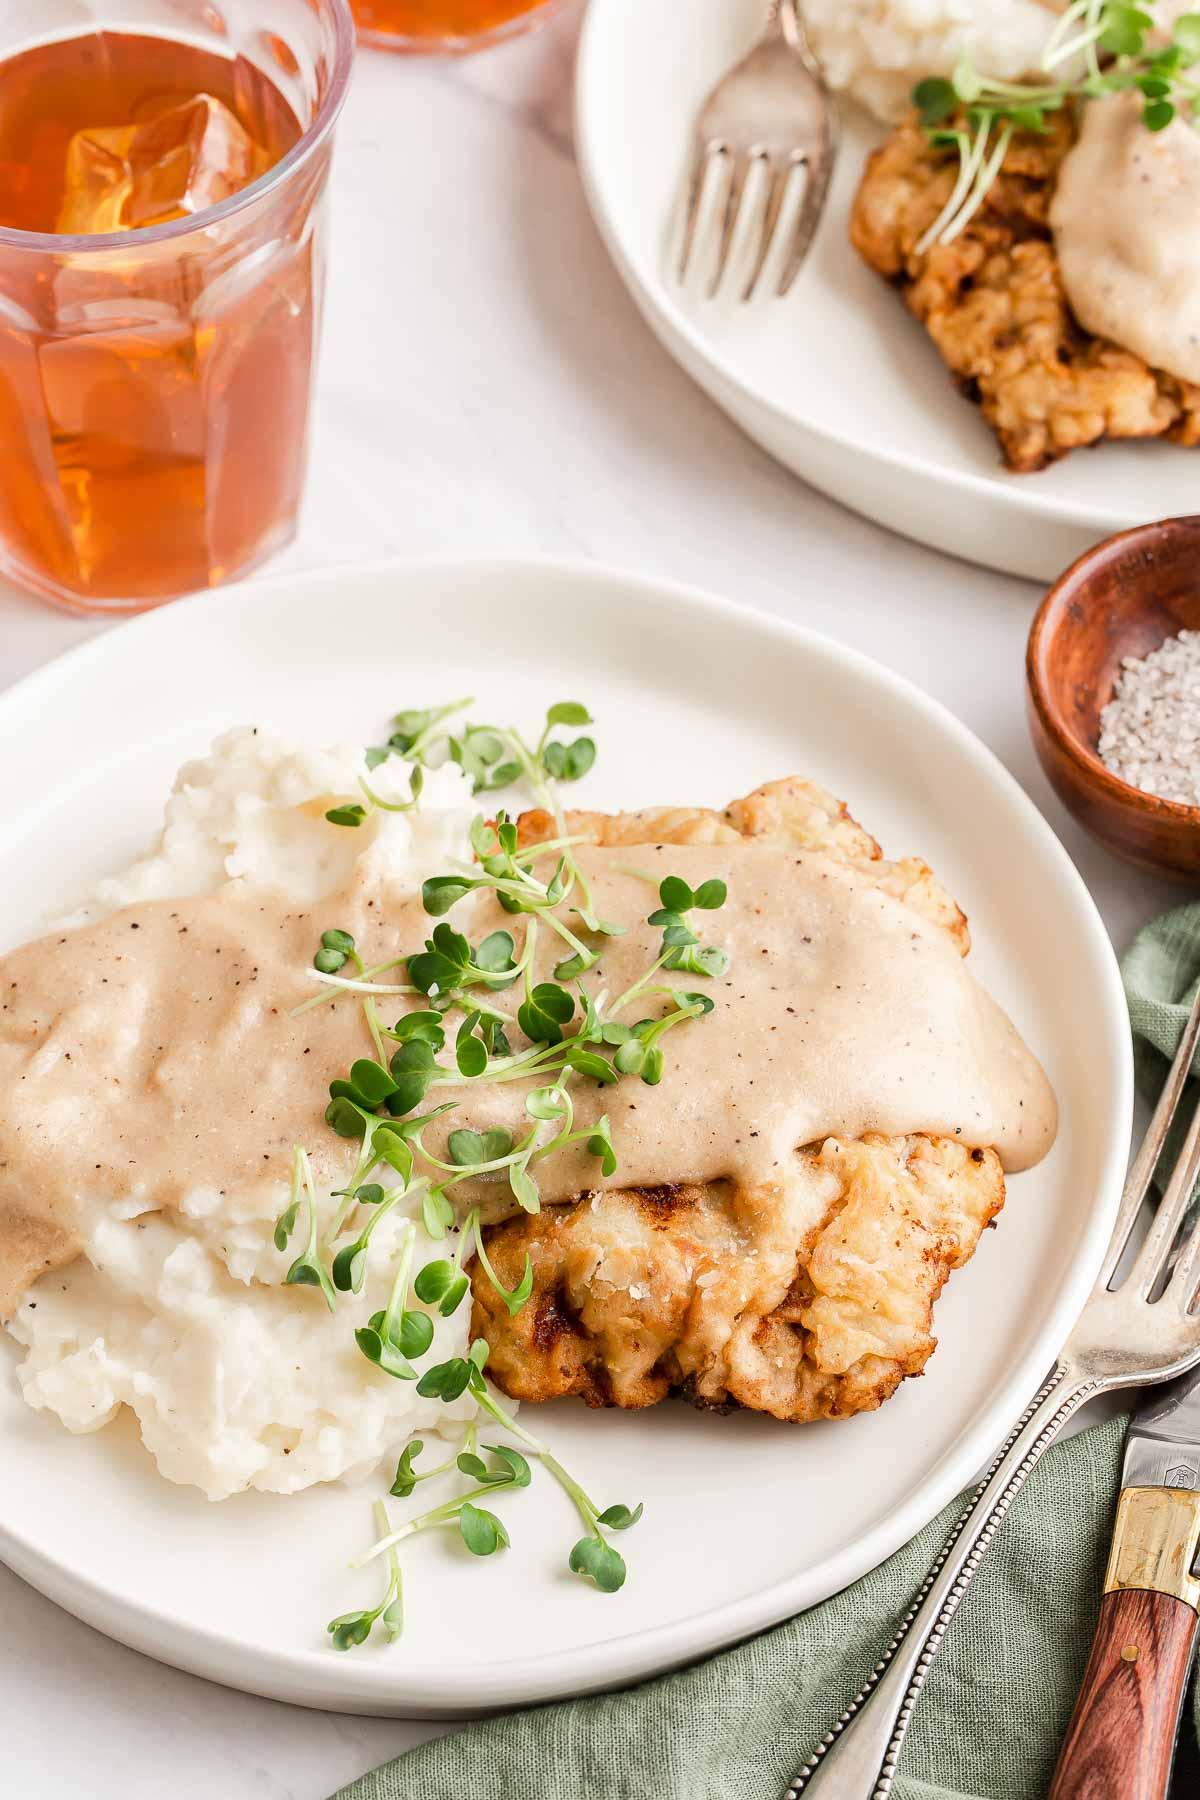 Plated chicken fried steak with mashed potatoes and gravy.